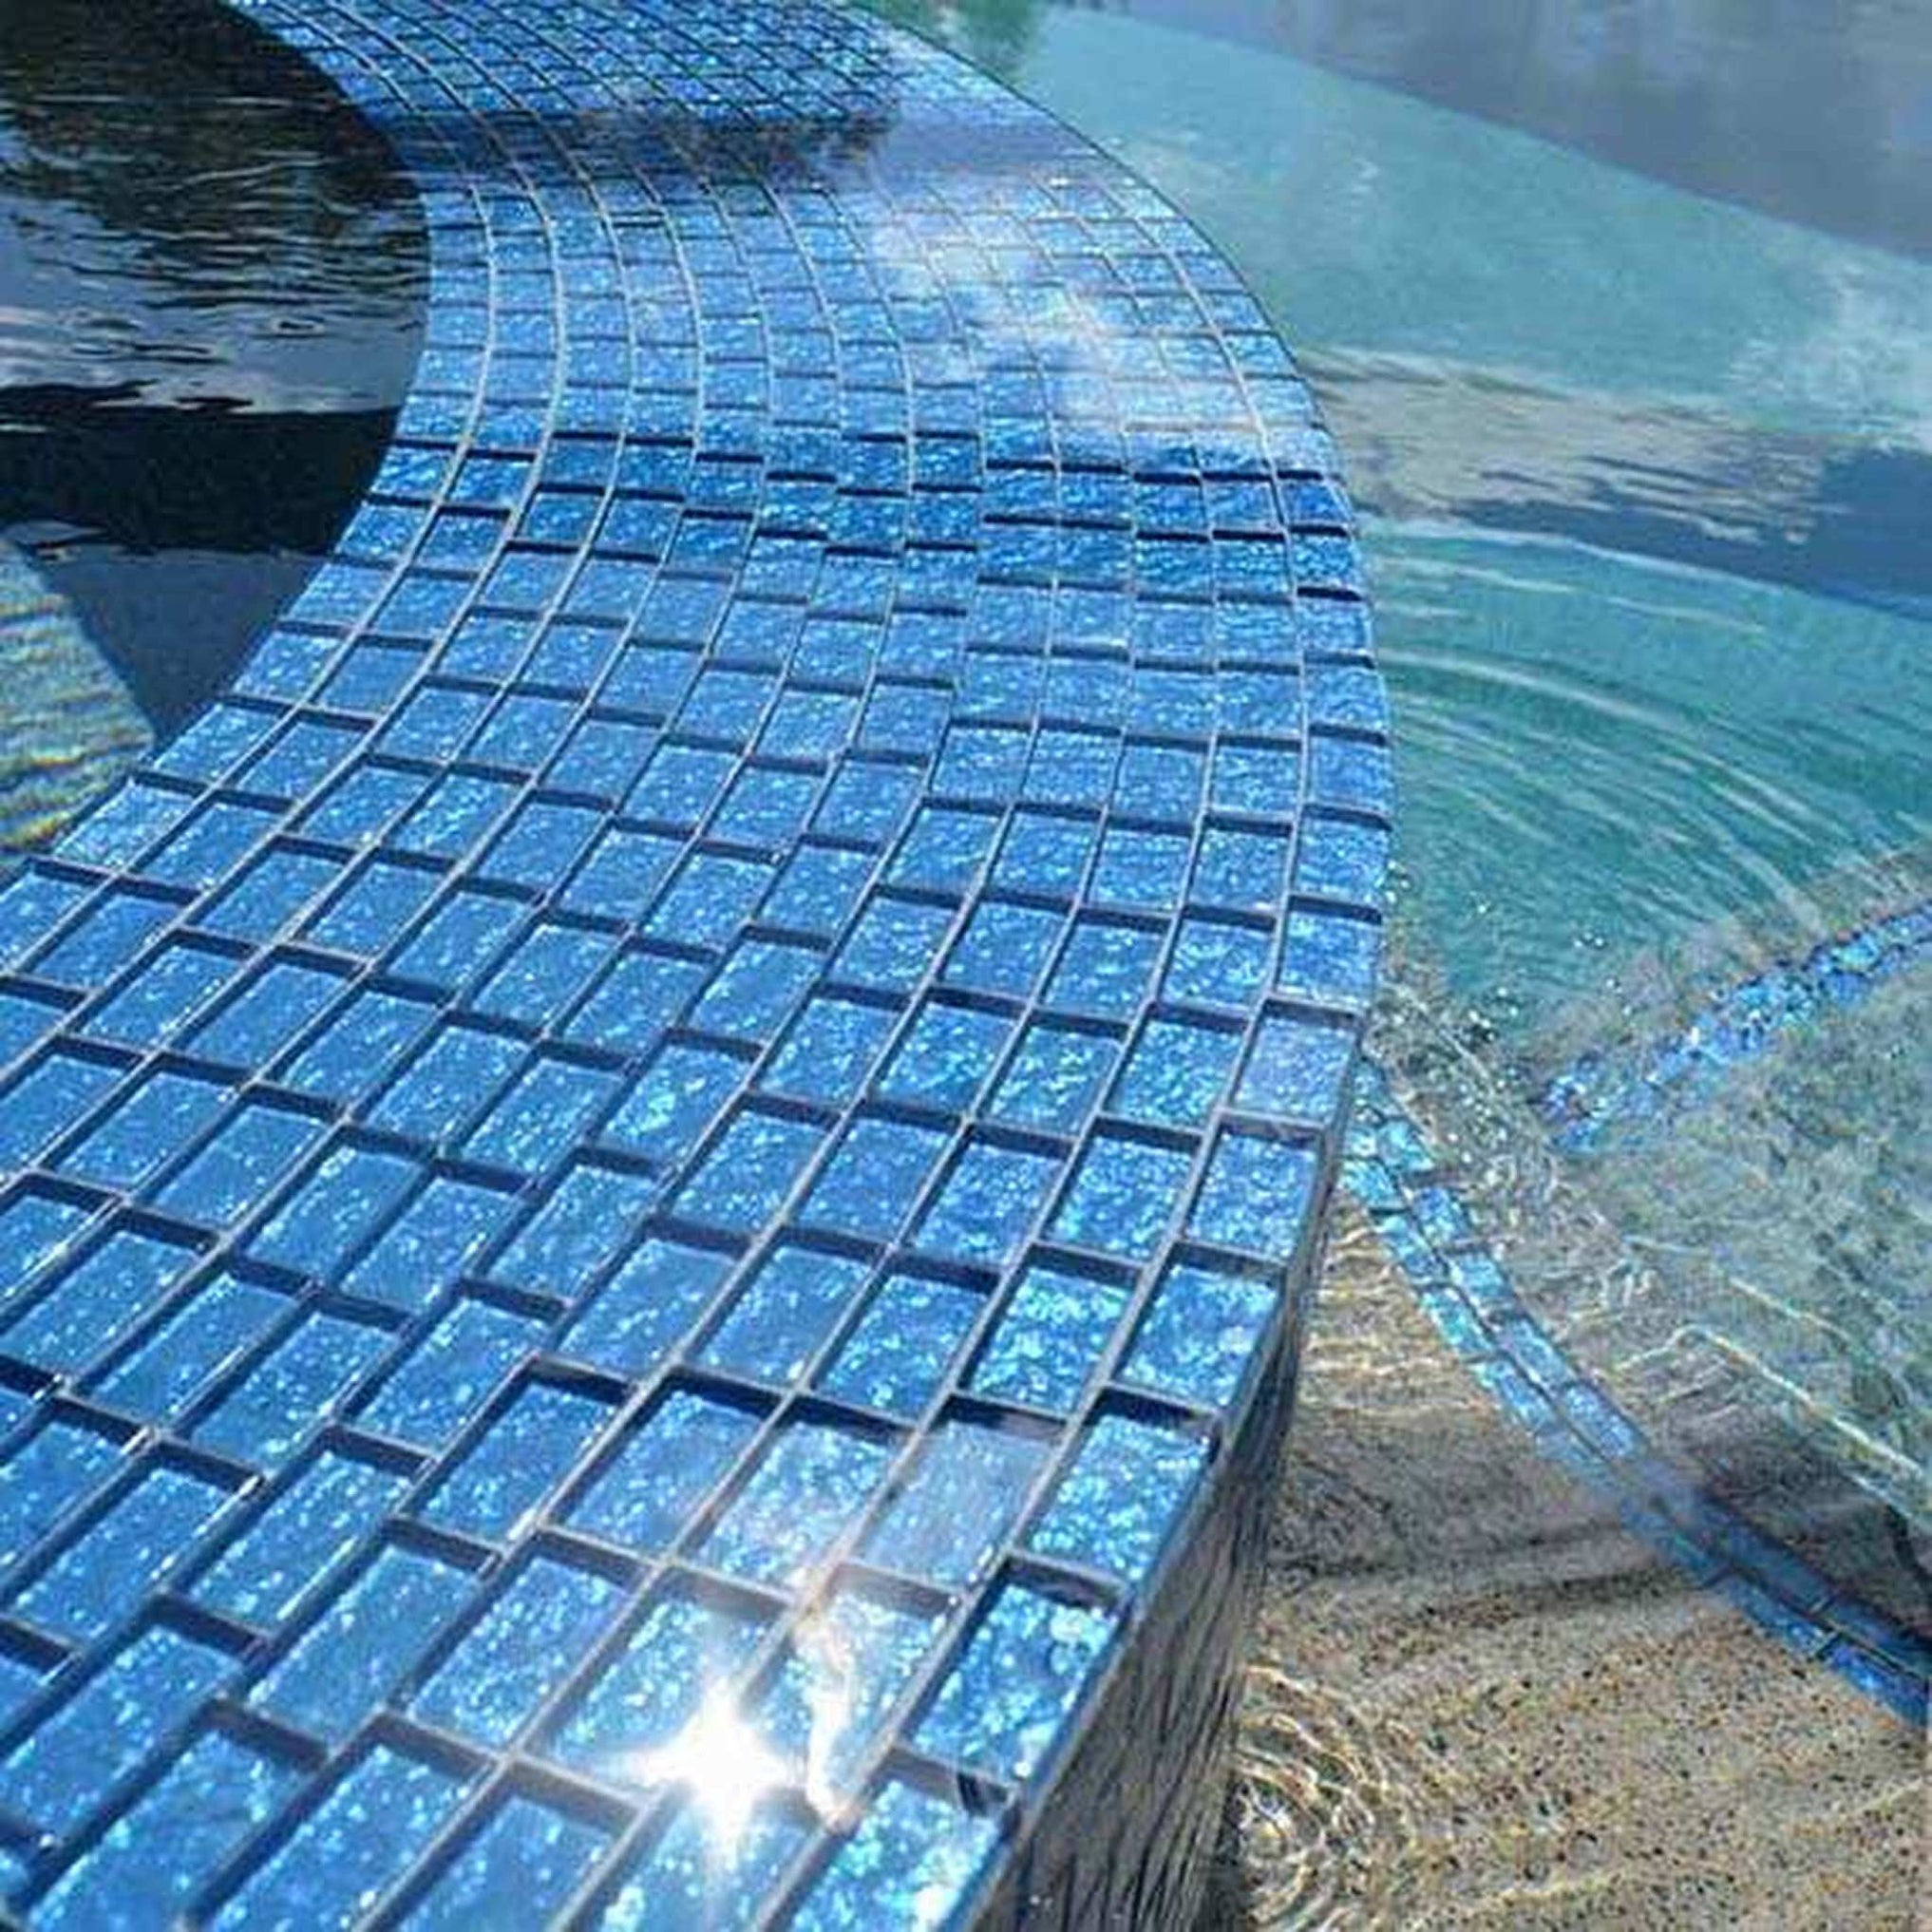 What Are Popular Swimming Pool Tile Colors Oasis Tile